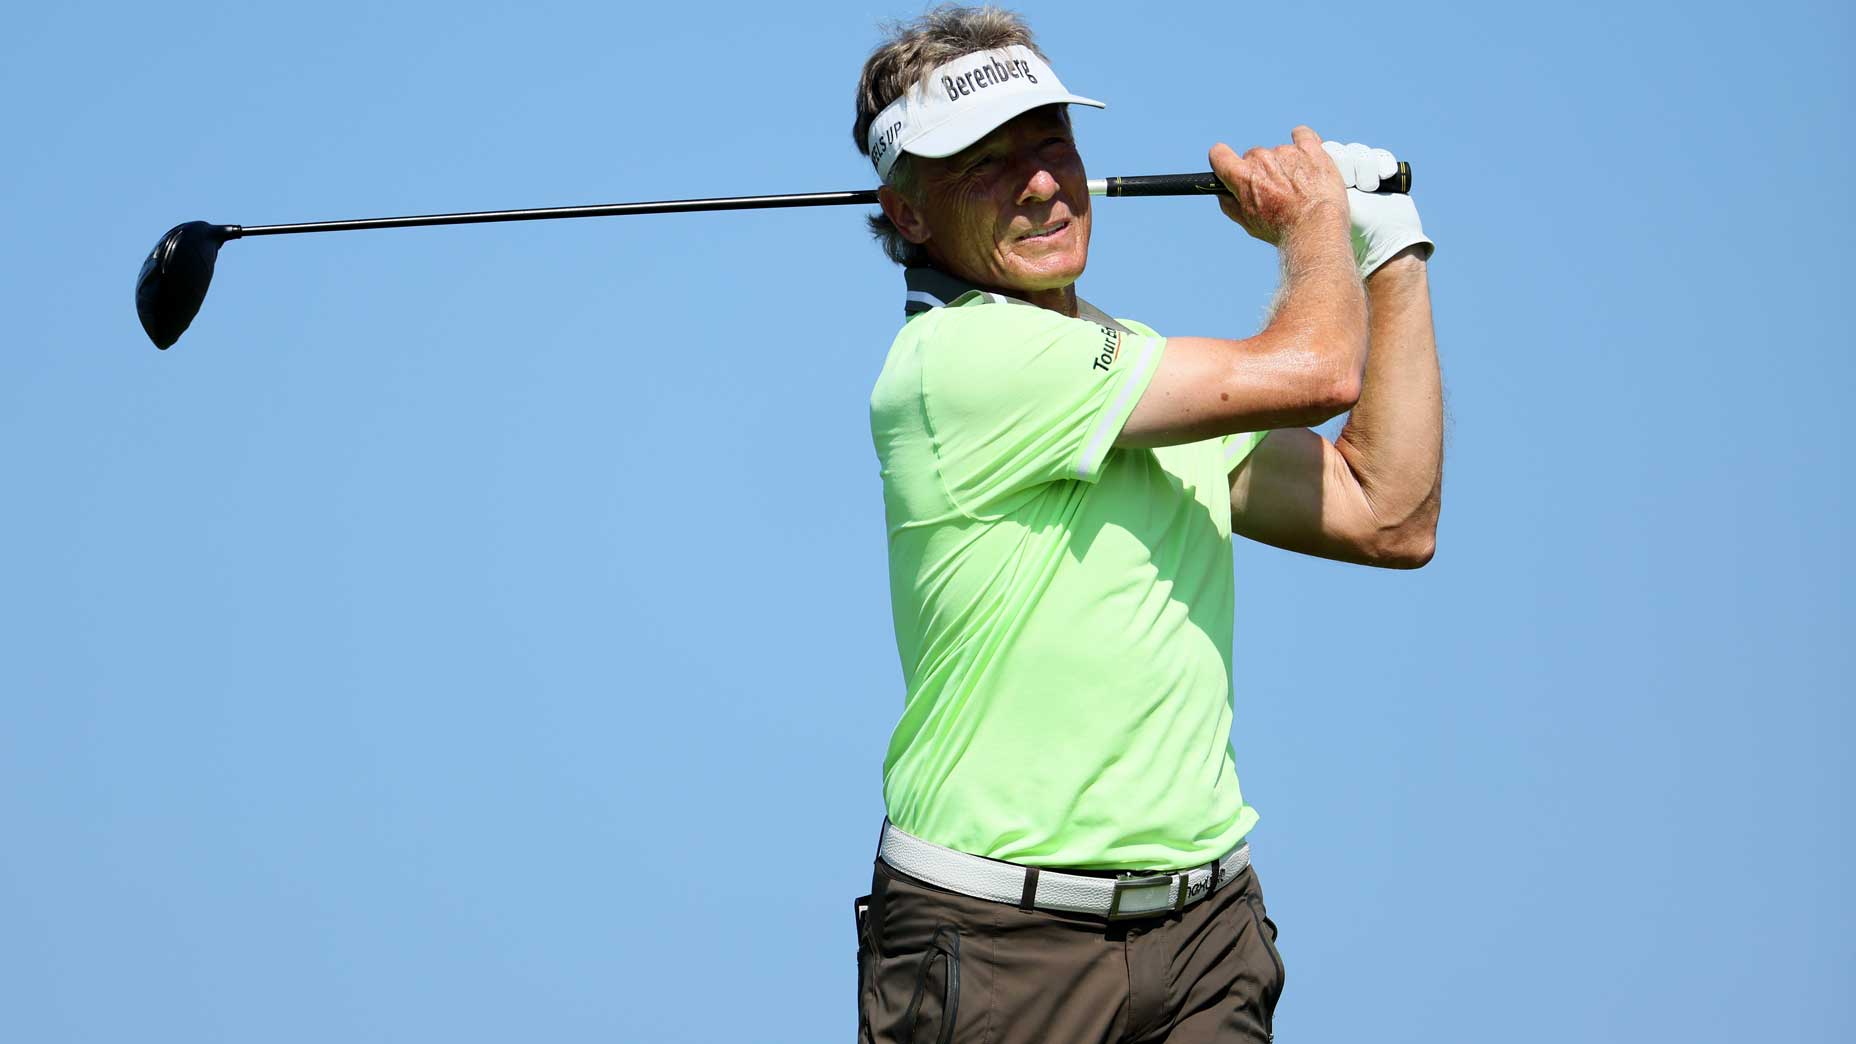 Bernhard Langer of Germany hits his tee shot on the second hole during the final round of the Mitsubishi Electric Championship at Hualalai at Hualalai Golf Club on January 21, 2023 in Kailua Kona, Hawaii.